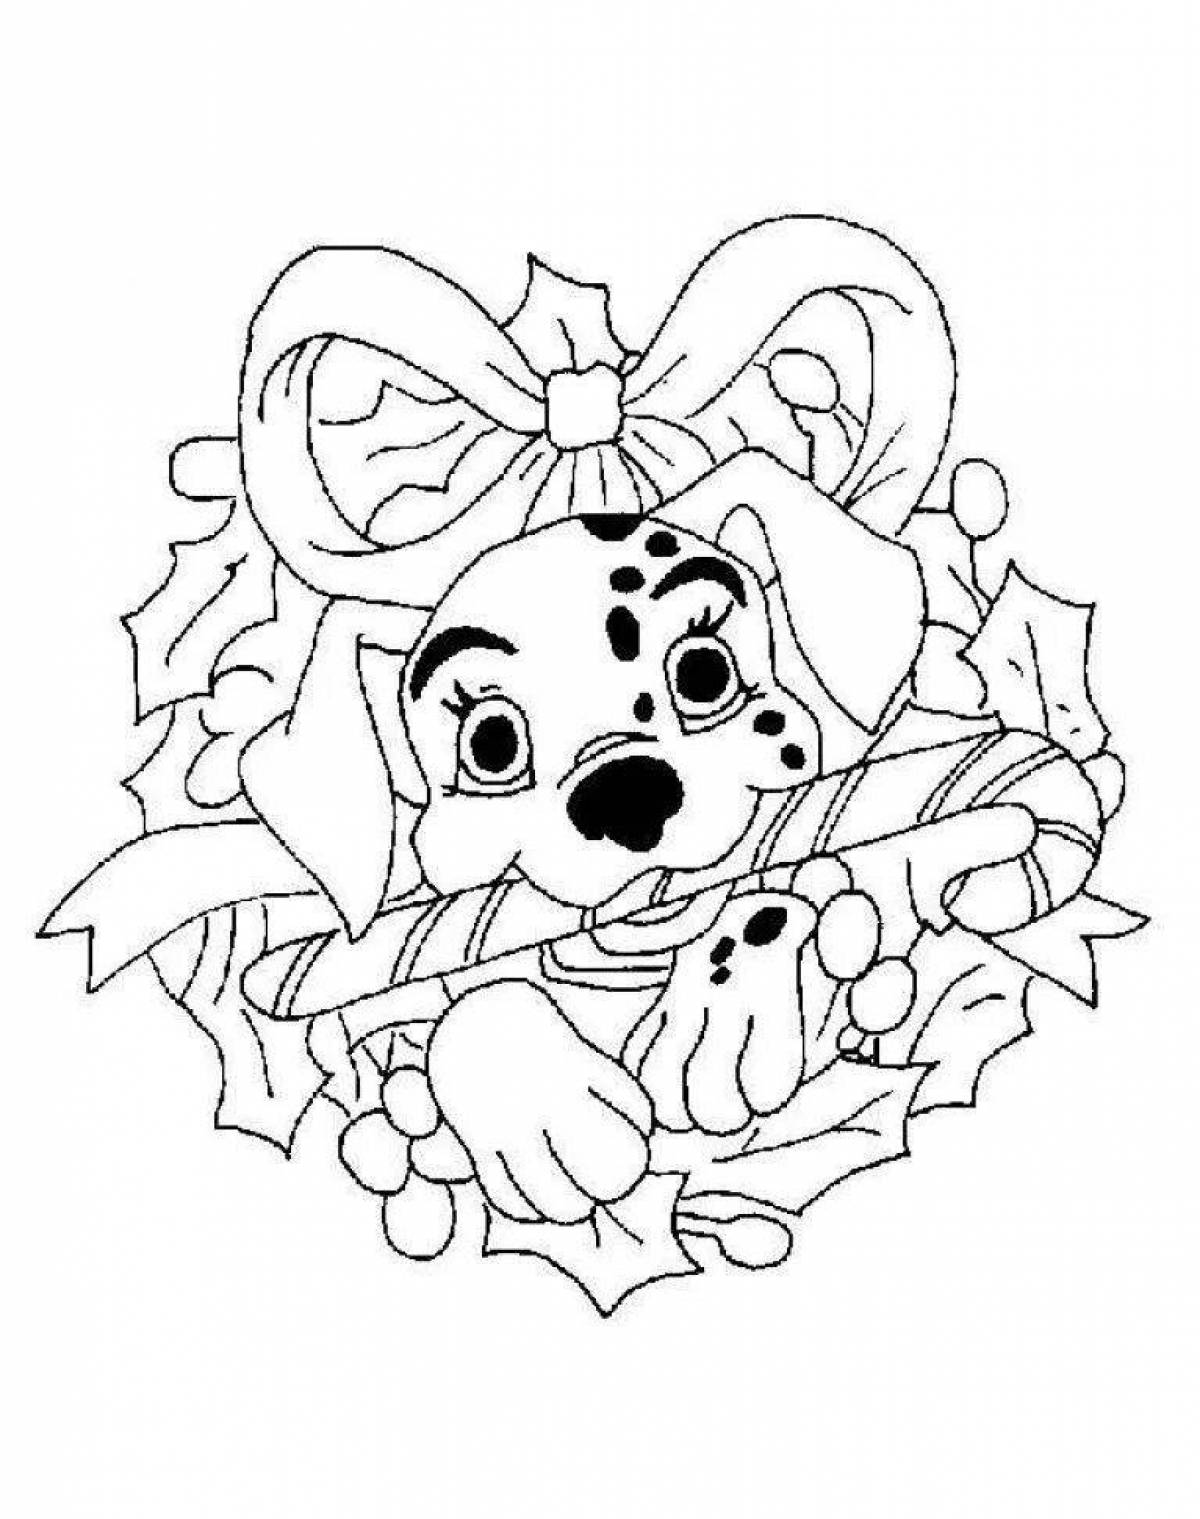 Dazzling dog Christmas coloring book